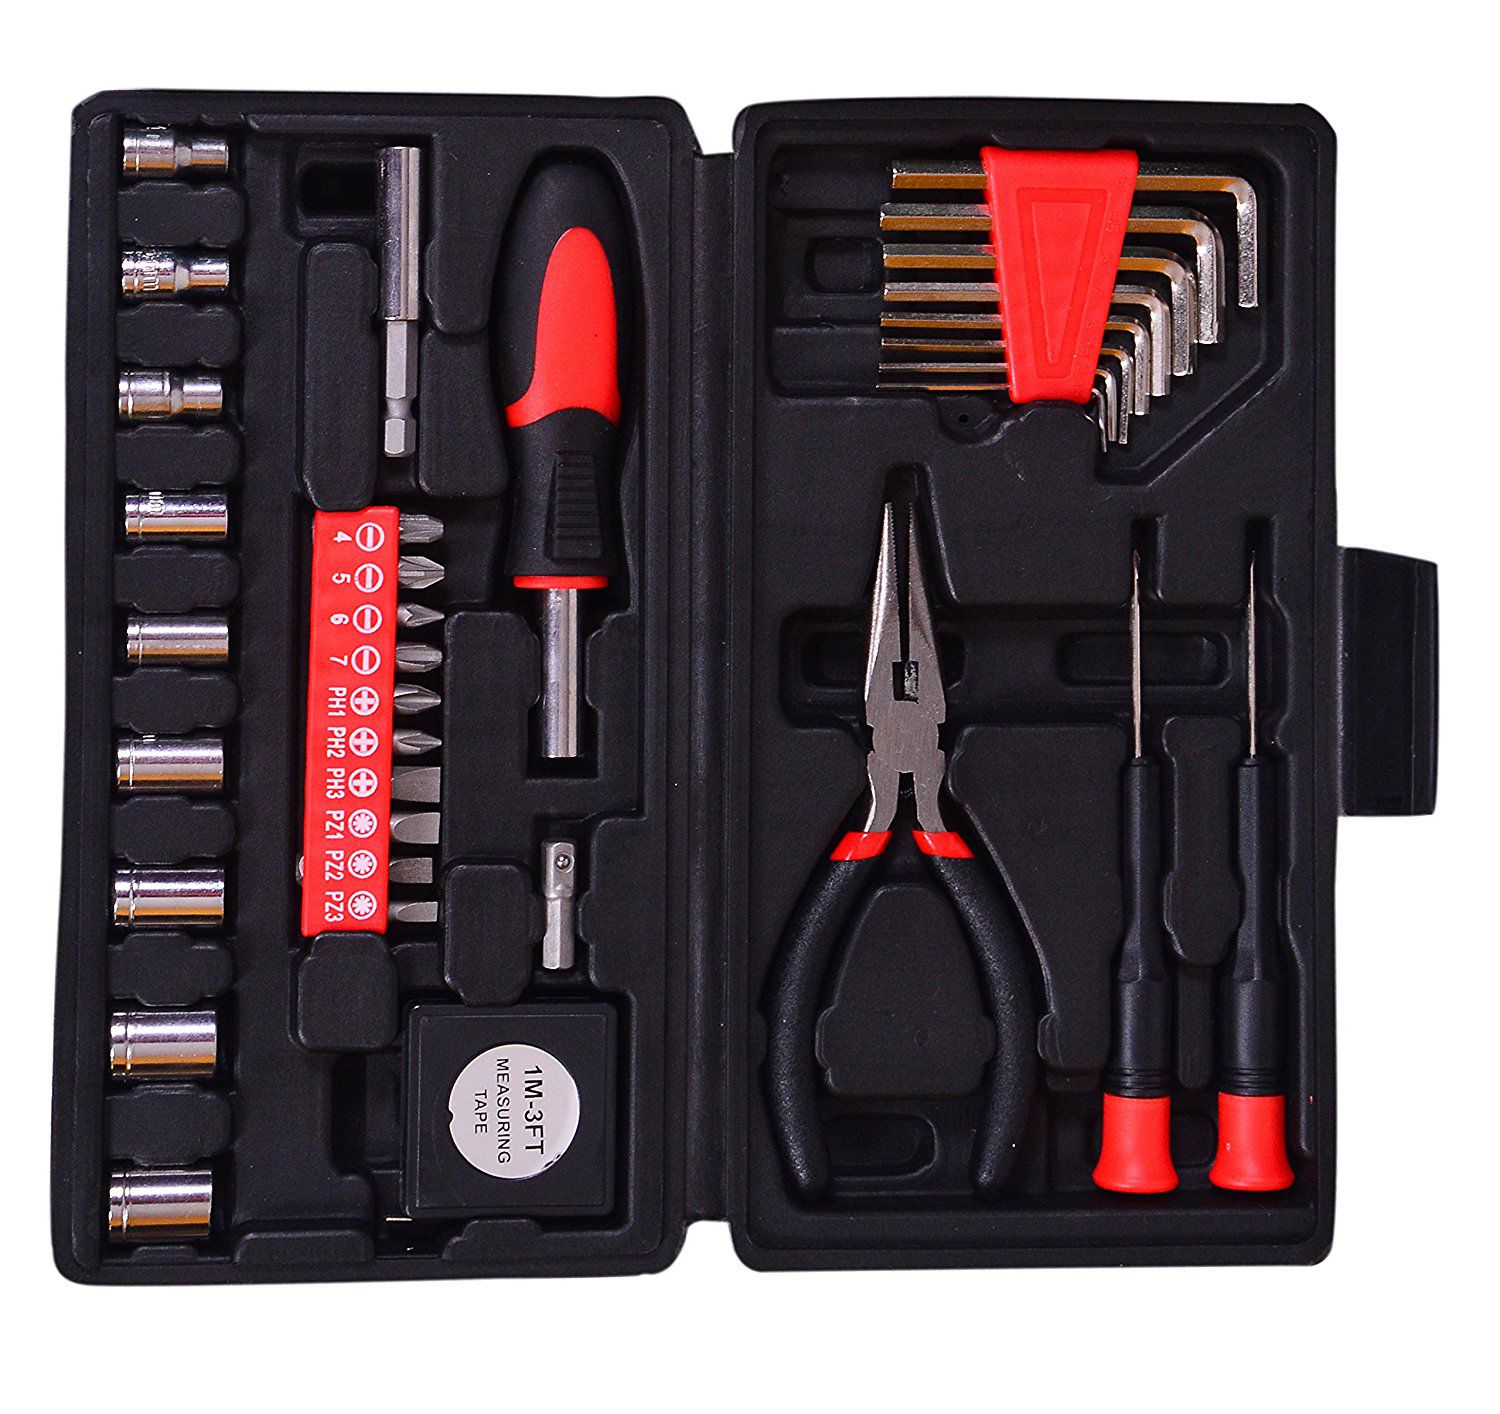     			Visko ST9252A Hand Tool Kit (Red, 35-Pieces)